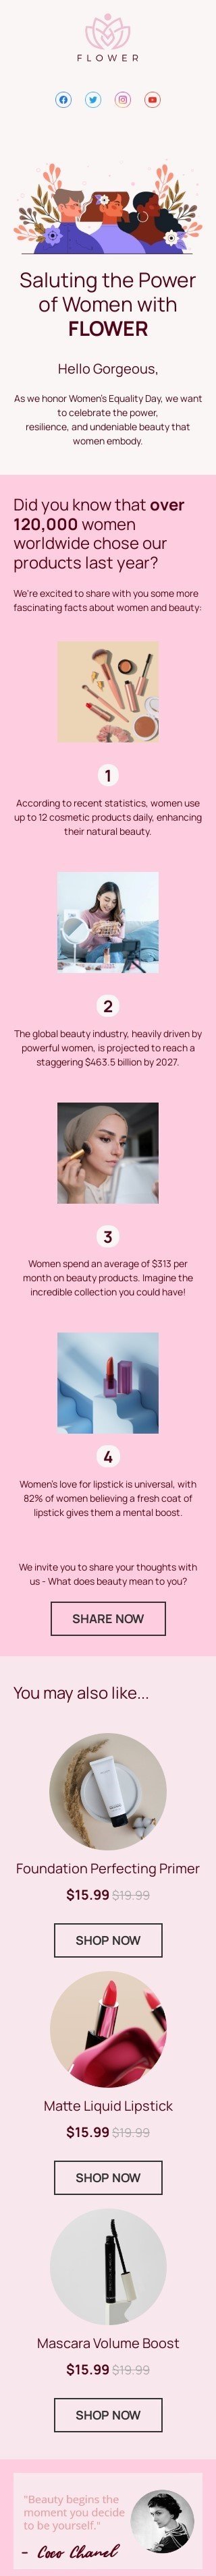 Women's Equality Day email template "Saluting the power of women" for beauty & personal care industry mobile view